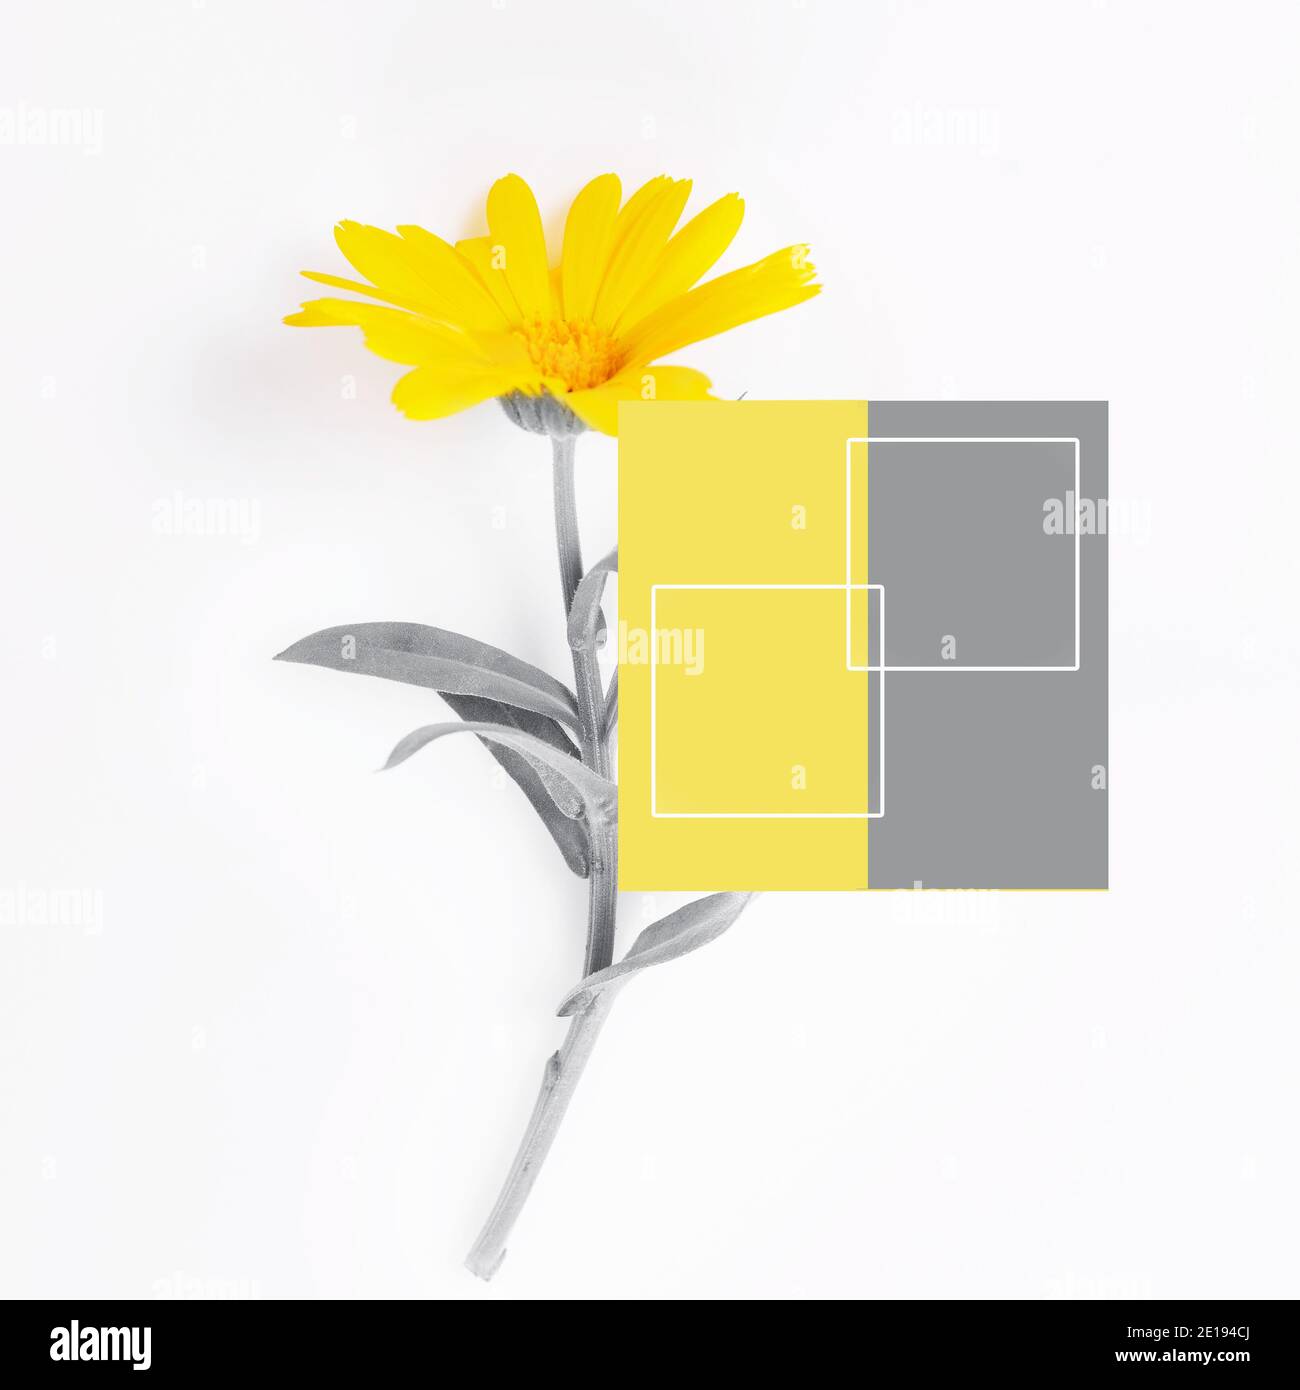 Calendula. The trendy colors of 2021 are gray and yellow Stock Photo